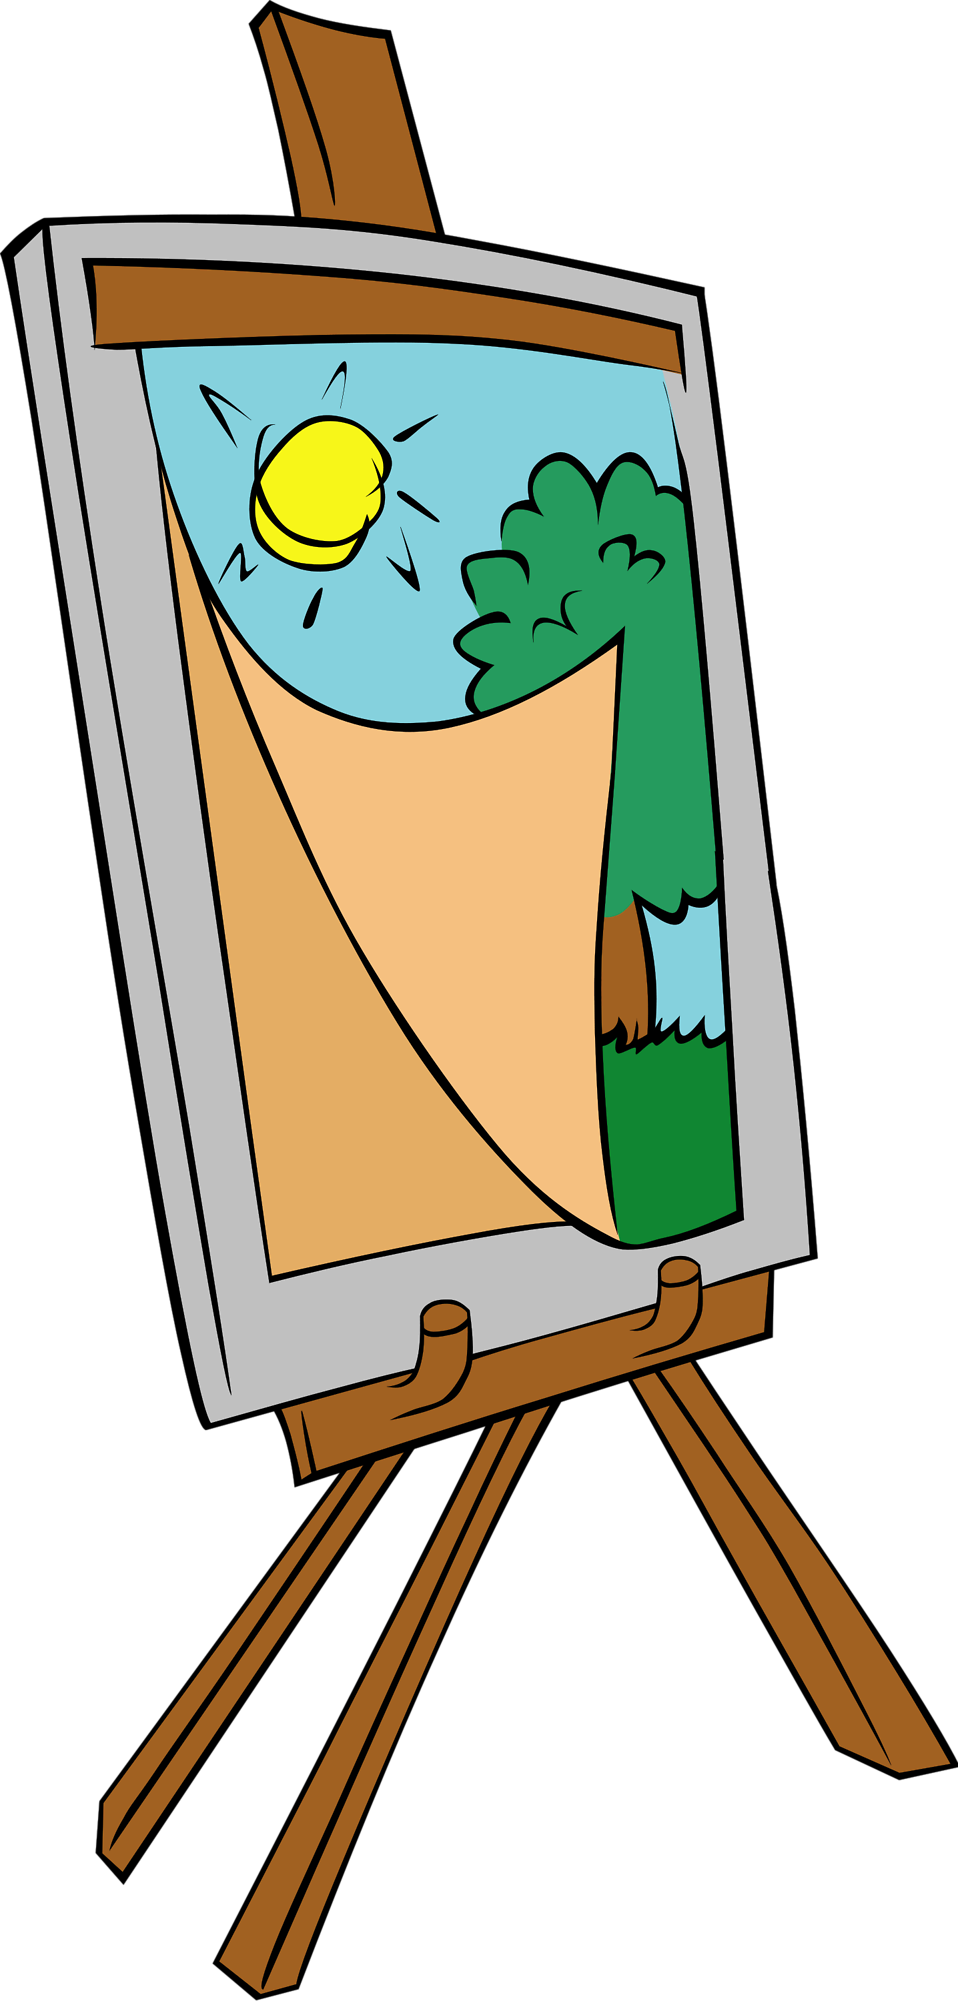 Painting   Free Stock Photo   Illustration Of A Painting On An Easel